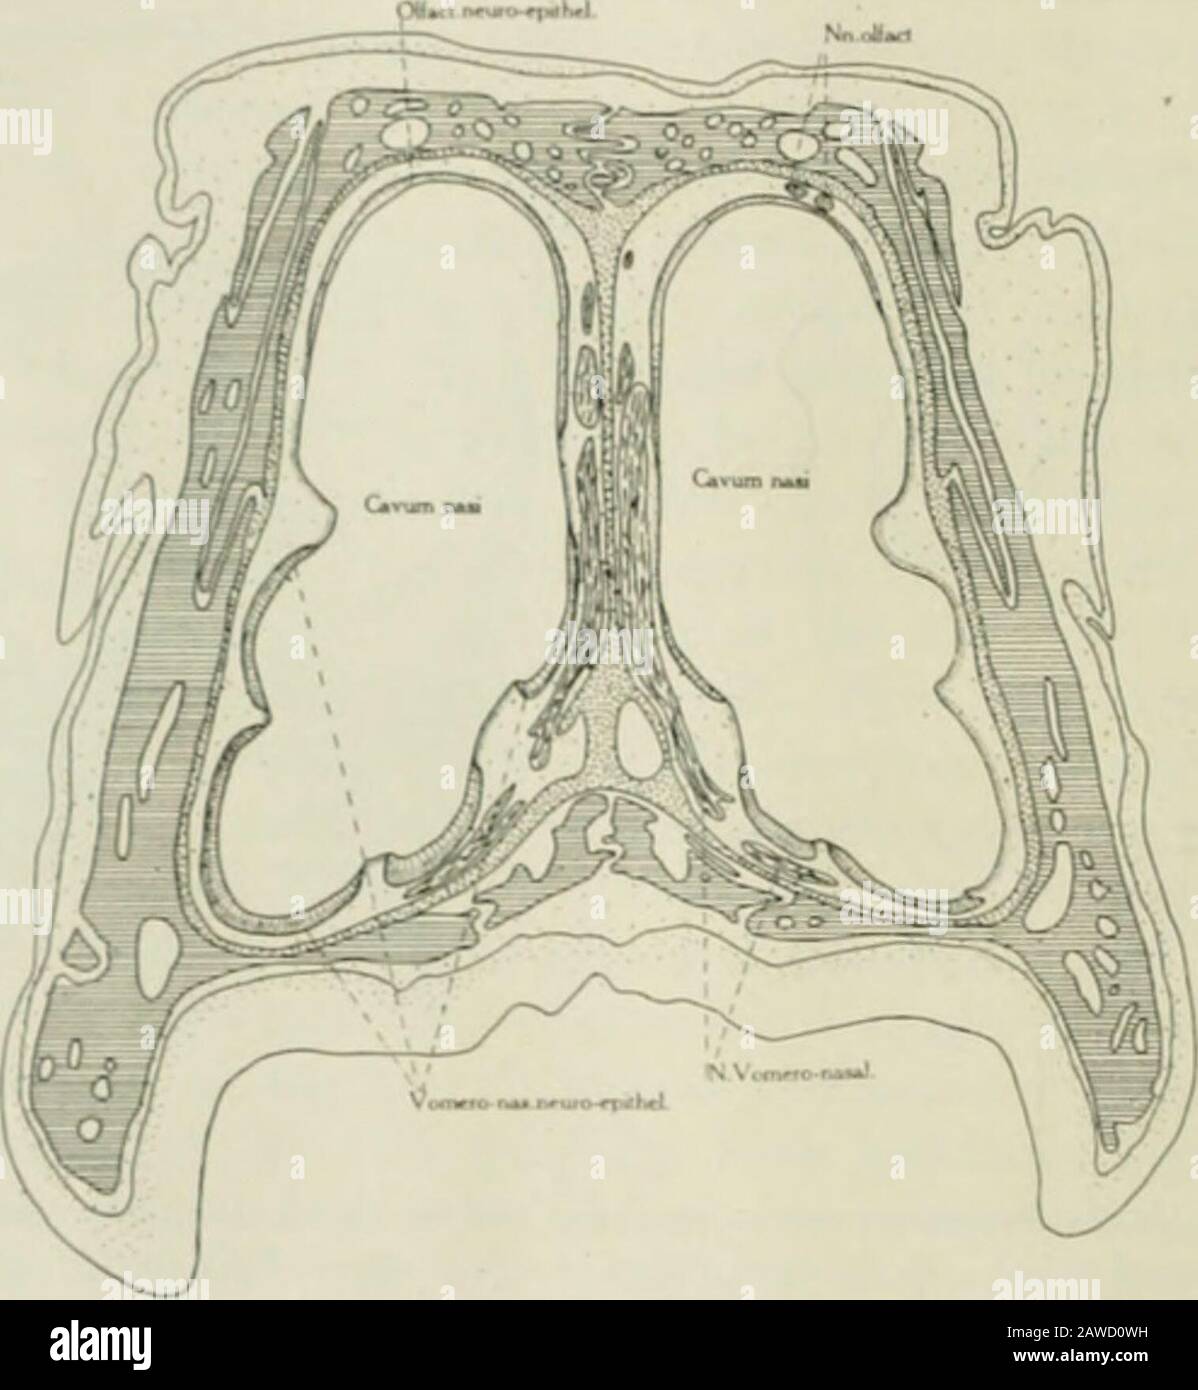 The anatomical record . al. It shows the form of this portion of tiie nasal fos.ia. X 10. Fig. 2 .V transverse section of the head of a turtle pa.ssiiig througli the an-terior portion of the principal nasal chamber to show the form of the na.sal fossaand the [losilion and distribution of the voinero-na.sal mucosa. X 10. The anterior na.sal pa.ssage extends nearly horizontally eaii-dalwaril from the naris ;md communicates with the princijialnasal chamher about midway betwivn the roof and tloor. Itis nearly cylindrical in outline and presents a low ridge thatcourses oblicjuely in a caudo-lateral Stock Photo